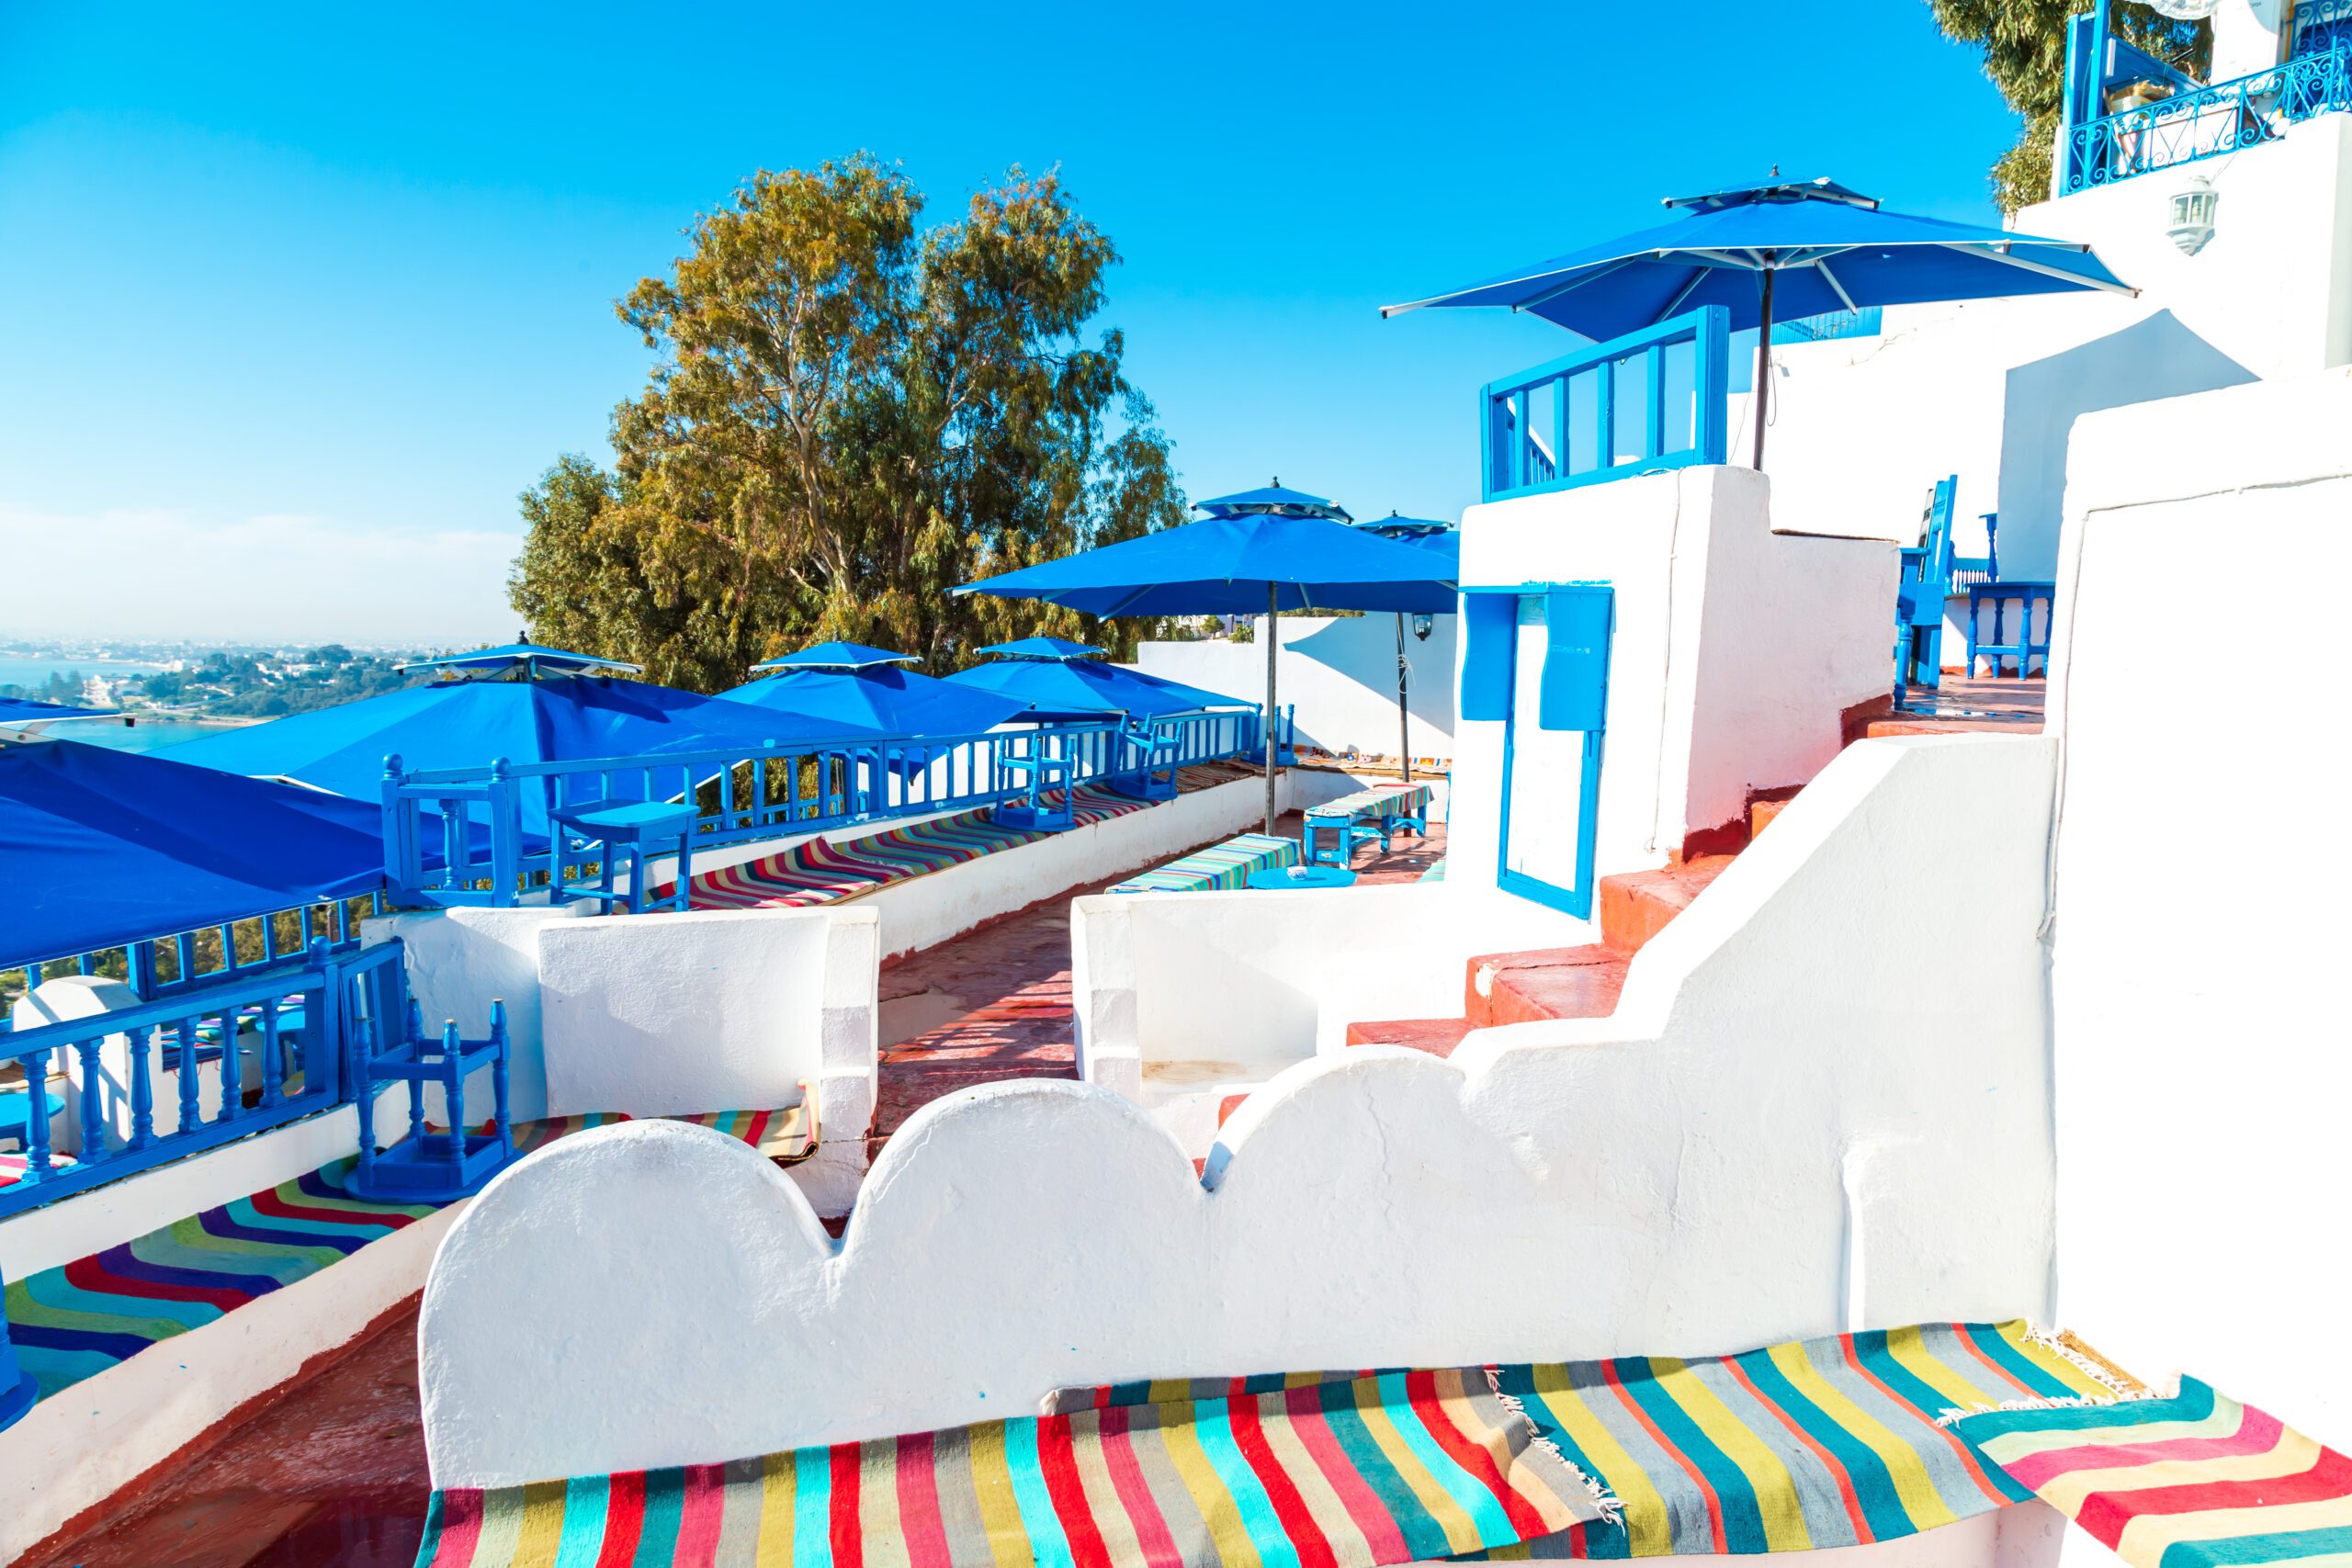 The famous cafe in Sidi Bou Said.